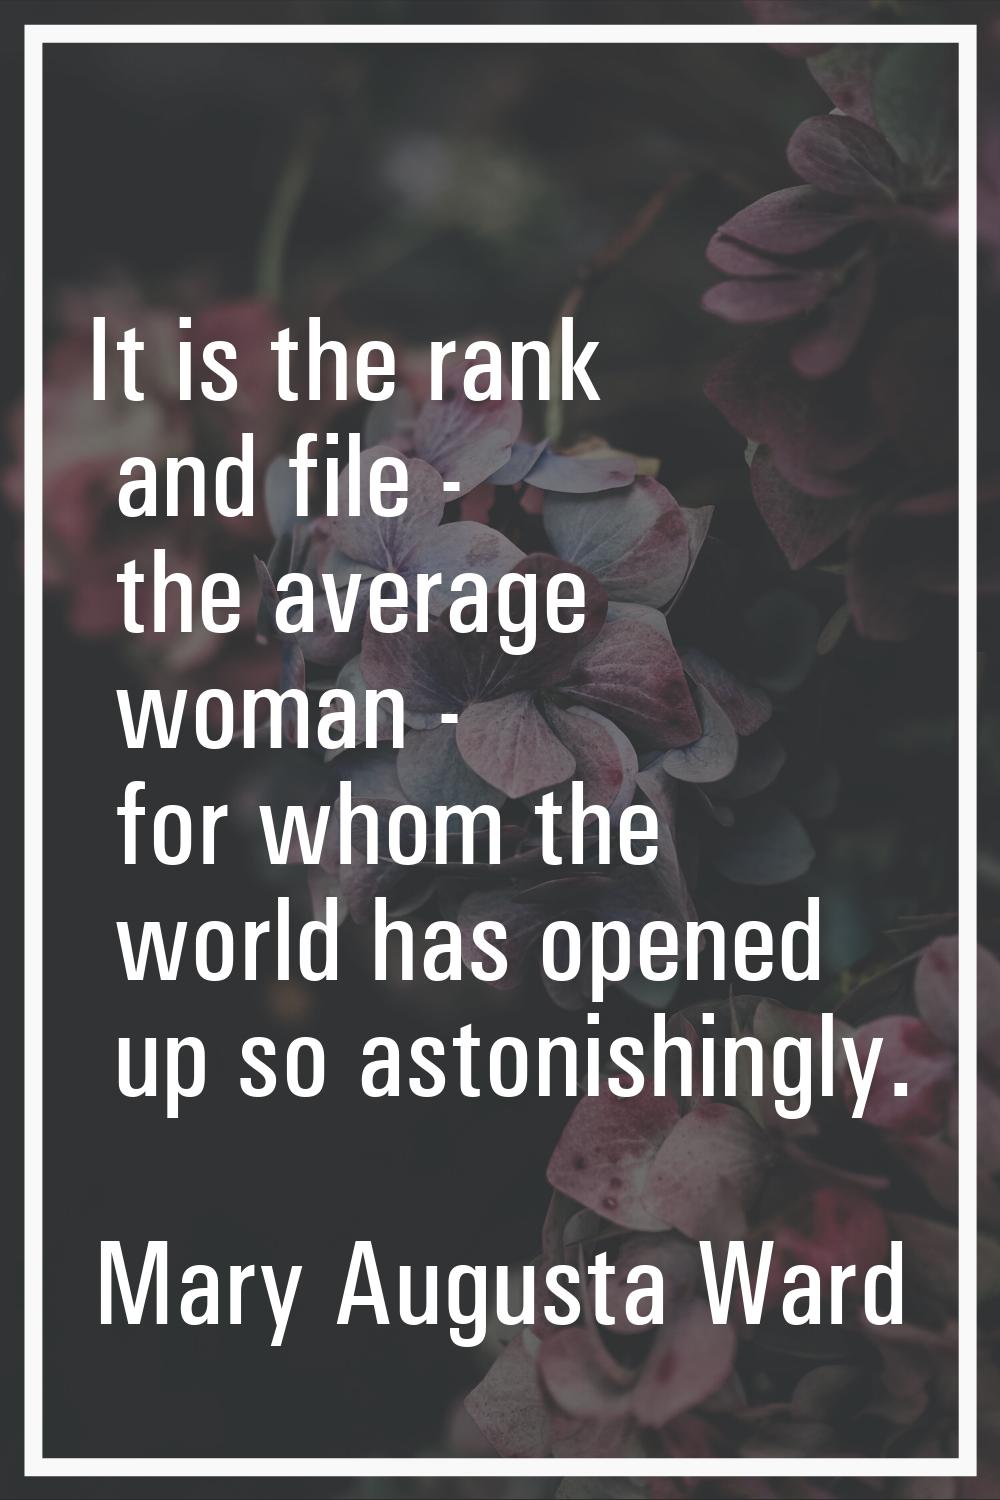 It is the rank and file - the average woman - for whom the world has opened up so astonishingly.